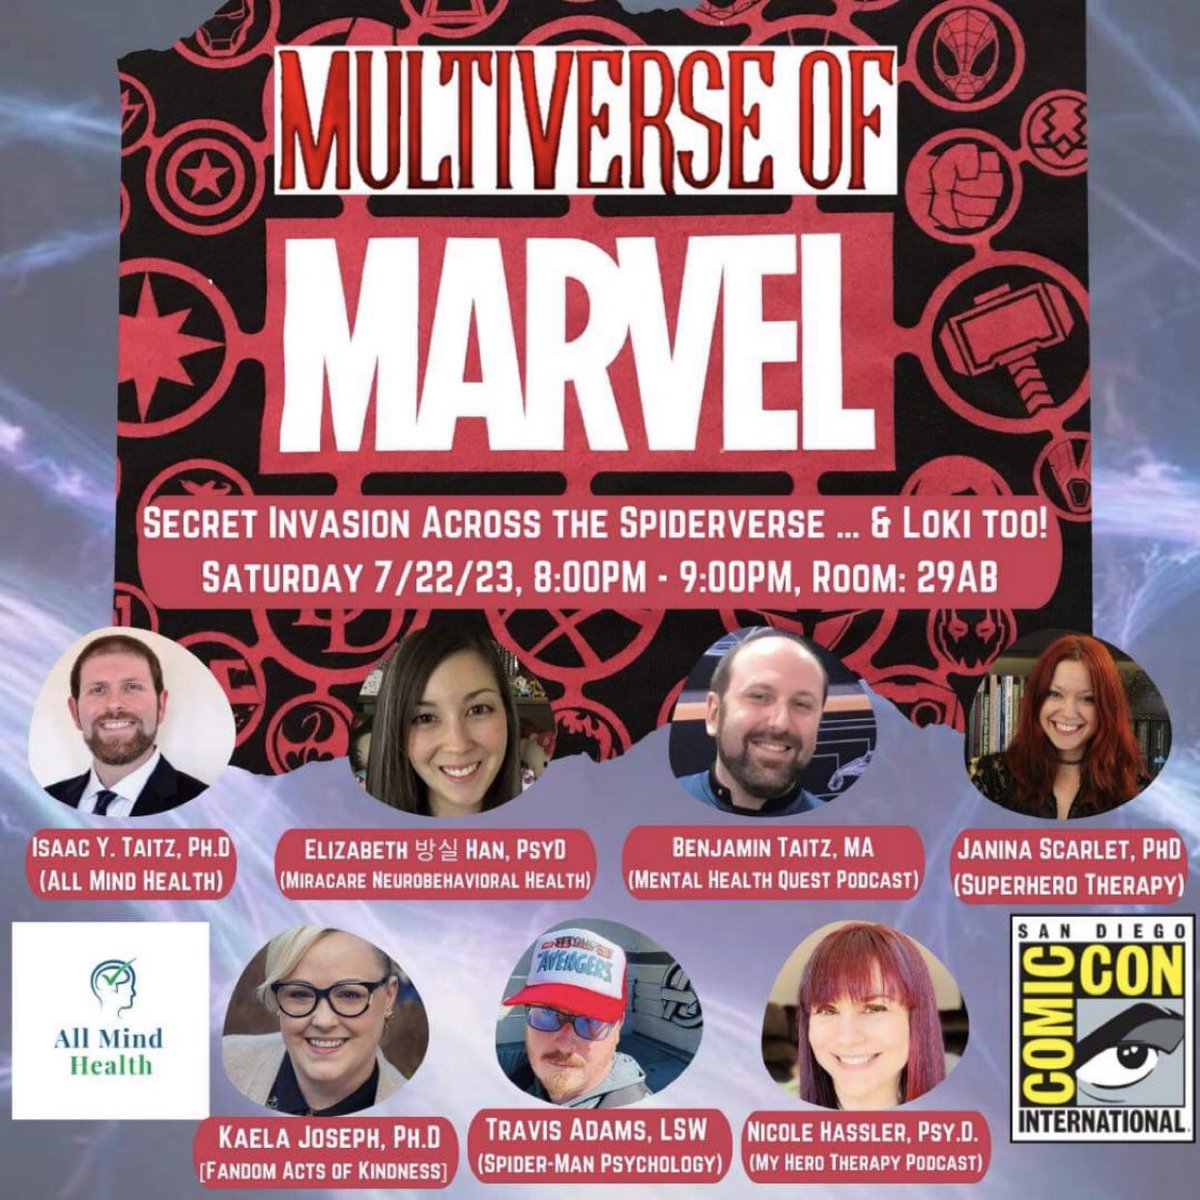 Our cohost @BSTpsychnerd will be repping our podcast at @Comic_Con and presenting alongside such cool people as @levelup_therapy @AllMindHealth1 @ShadowQuill @mindbodyfandom @AKNerdFighting @TheToniSanchez @DrVanessaHintz @lizzyns @jordanjamparty @iKnowRio and @themarine_peer !!!